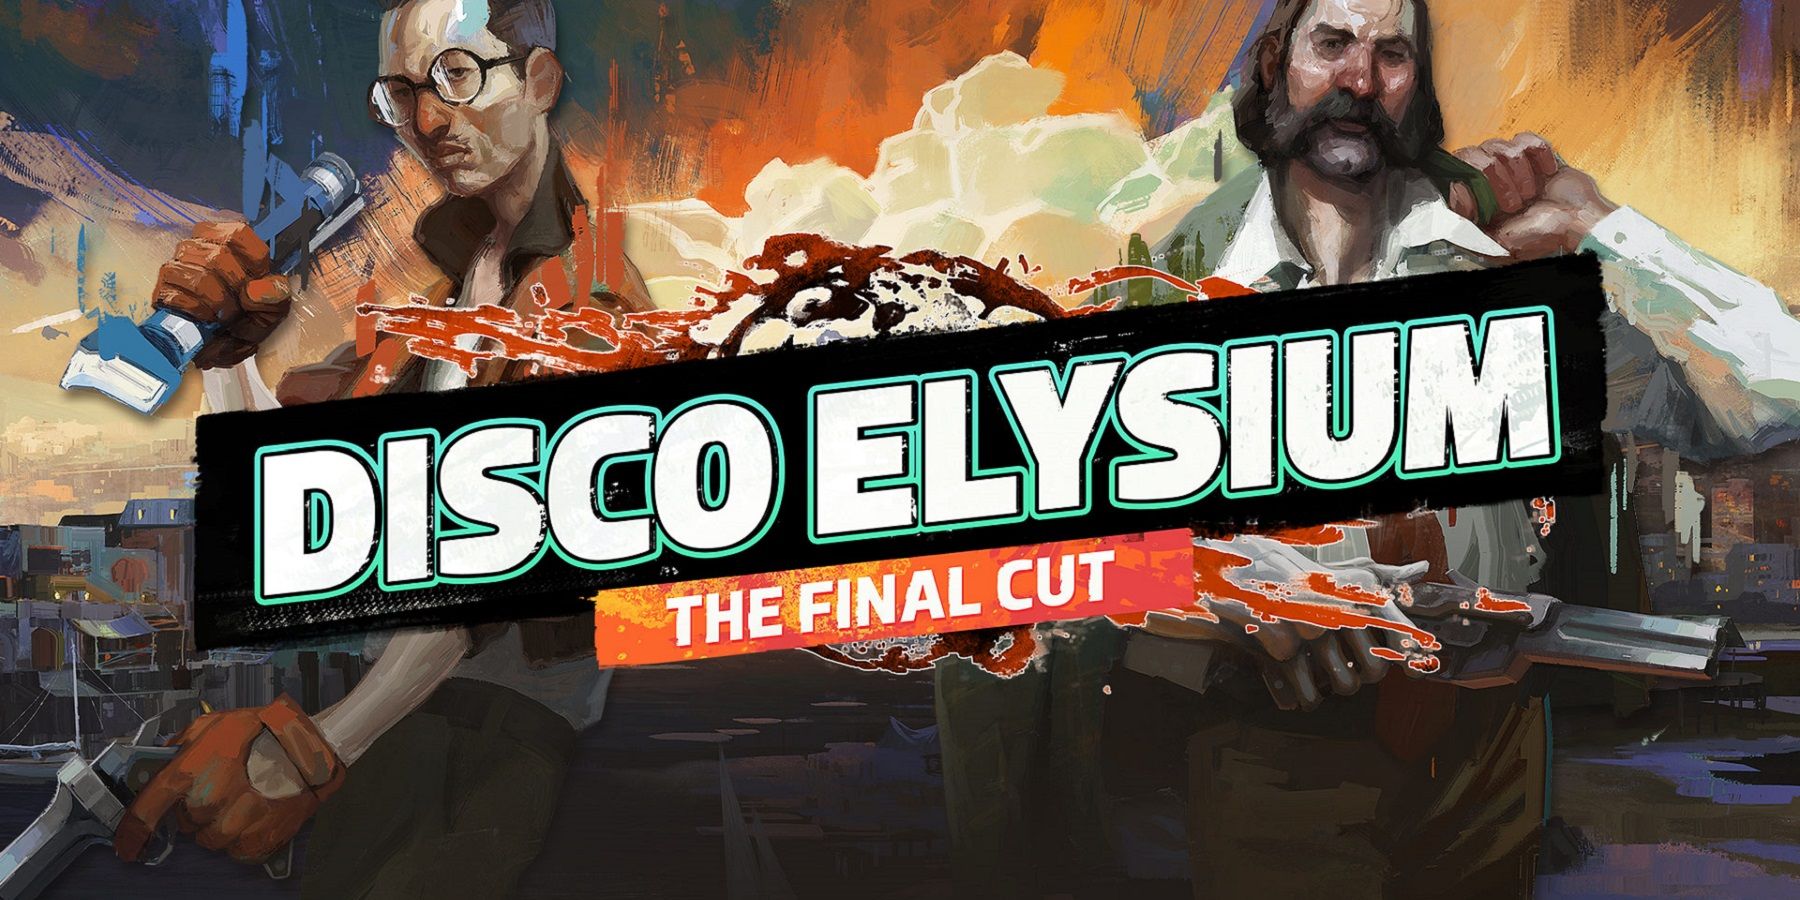 Image from Disco Elysium: The Final Cut showing Kim and Harrier behind the game's logo.